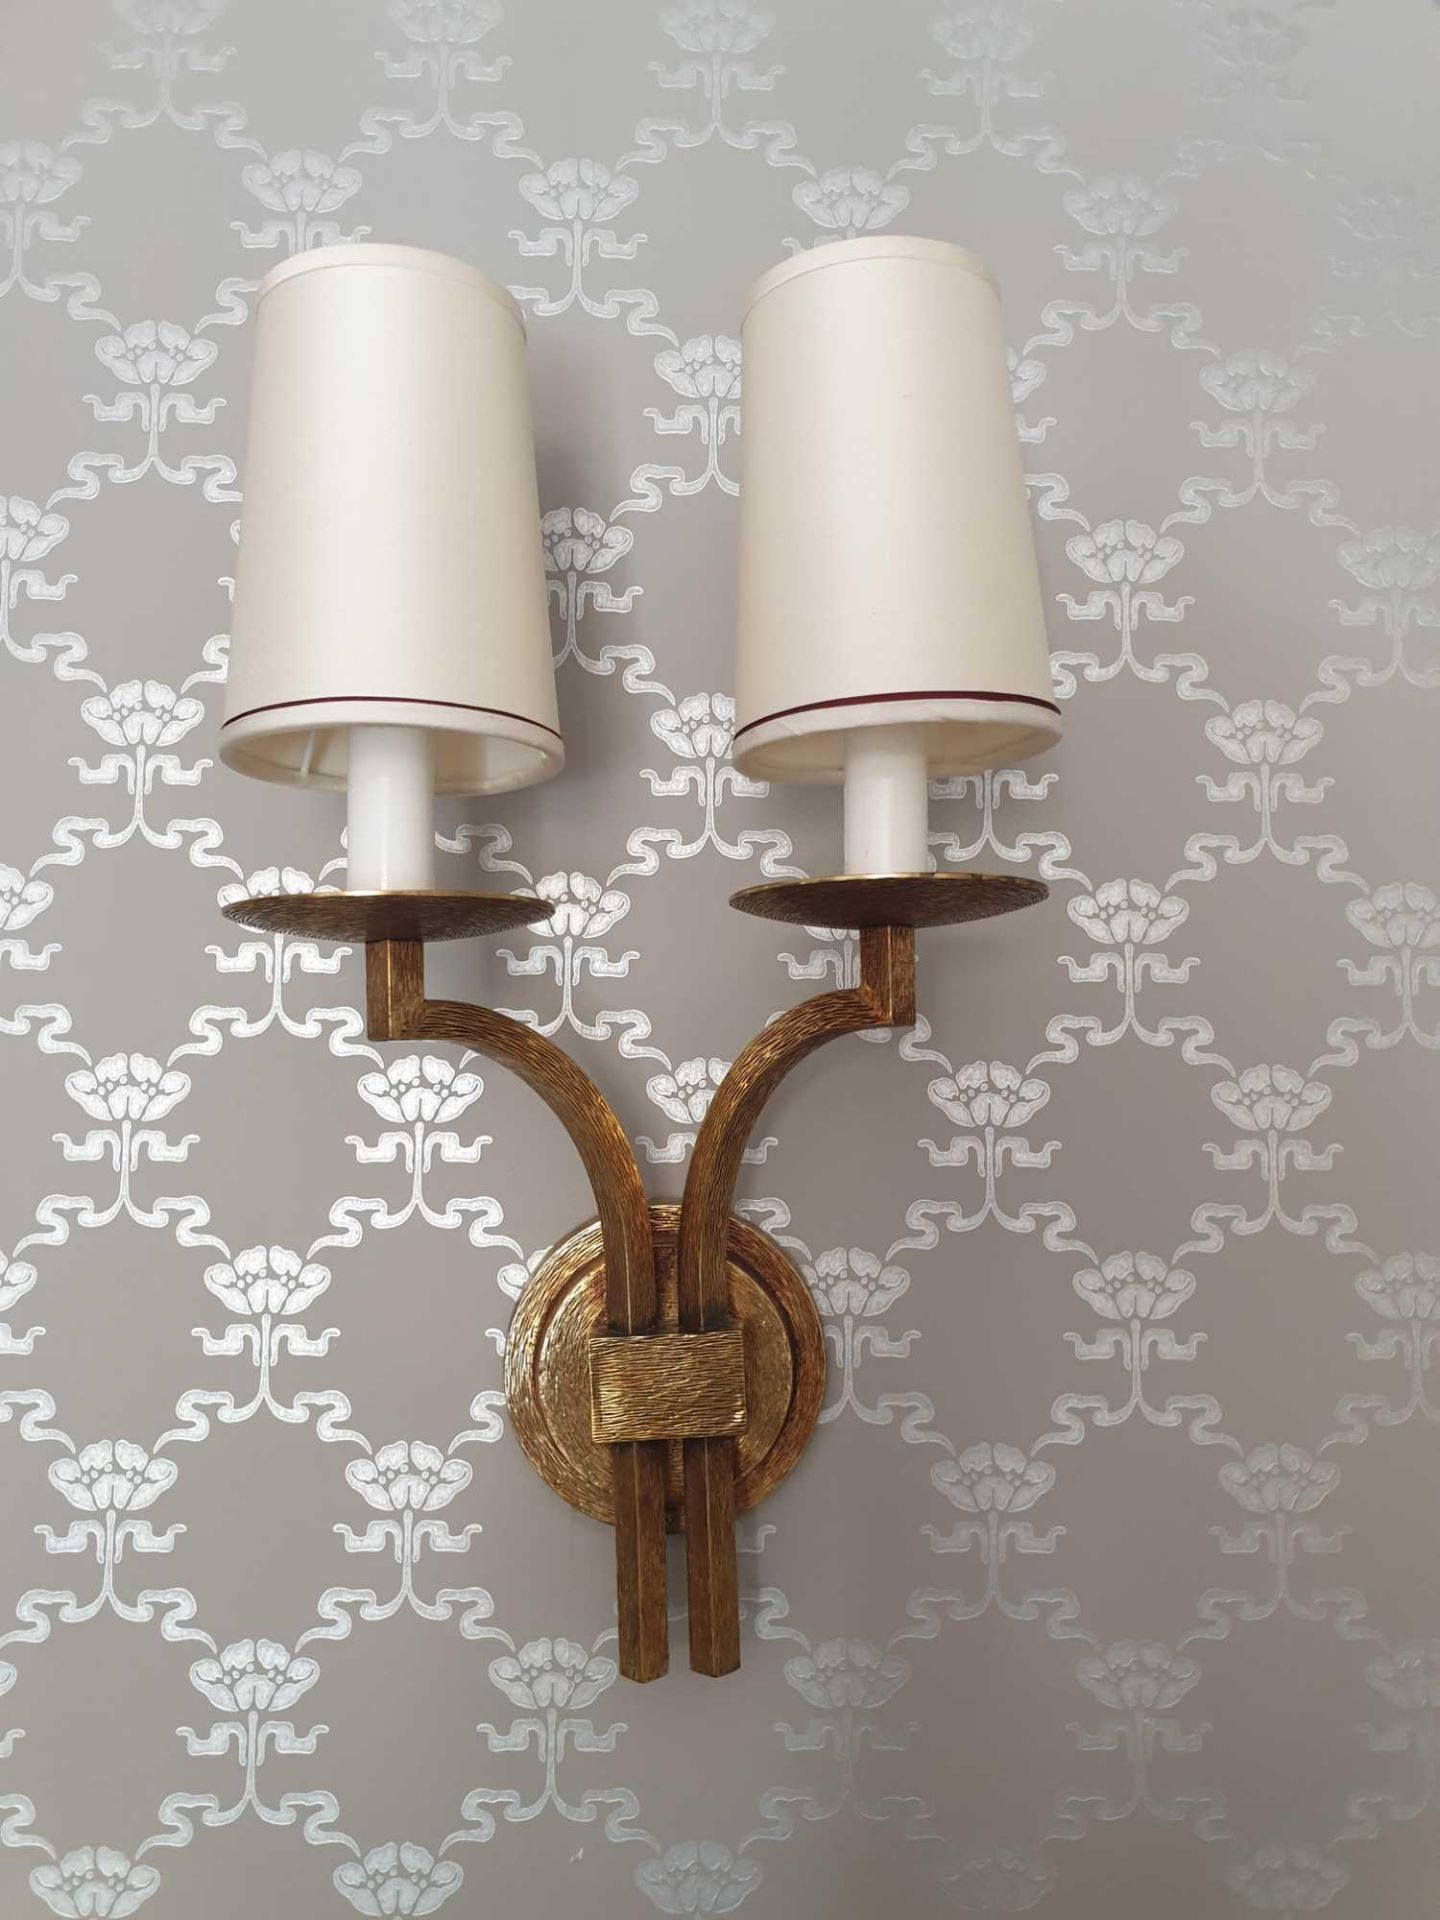 A Pair Of Dernier And Hamlyn Twin Arm Antique Bronzed Wall Sconces With Shade 51cm (Room 310 & 311)